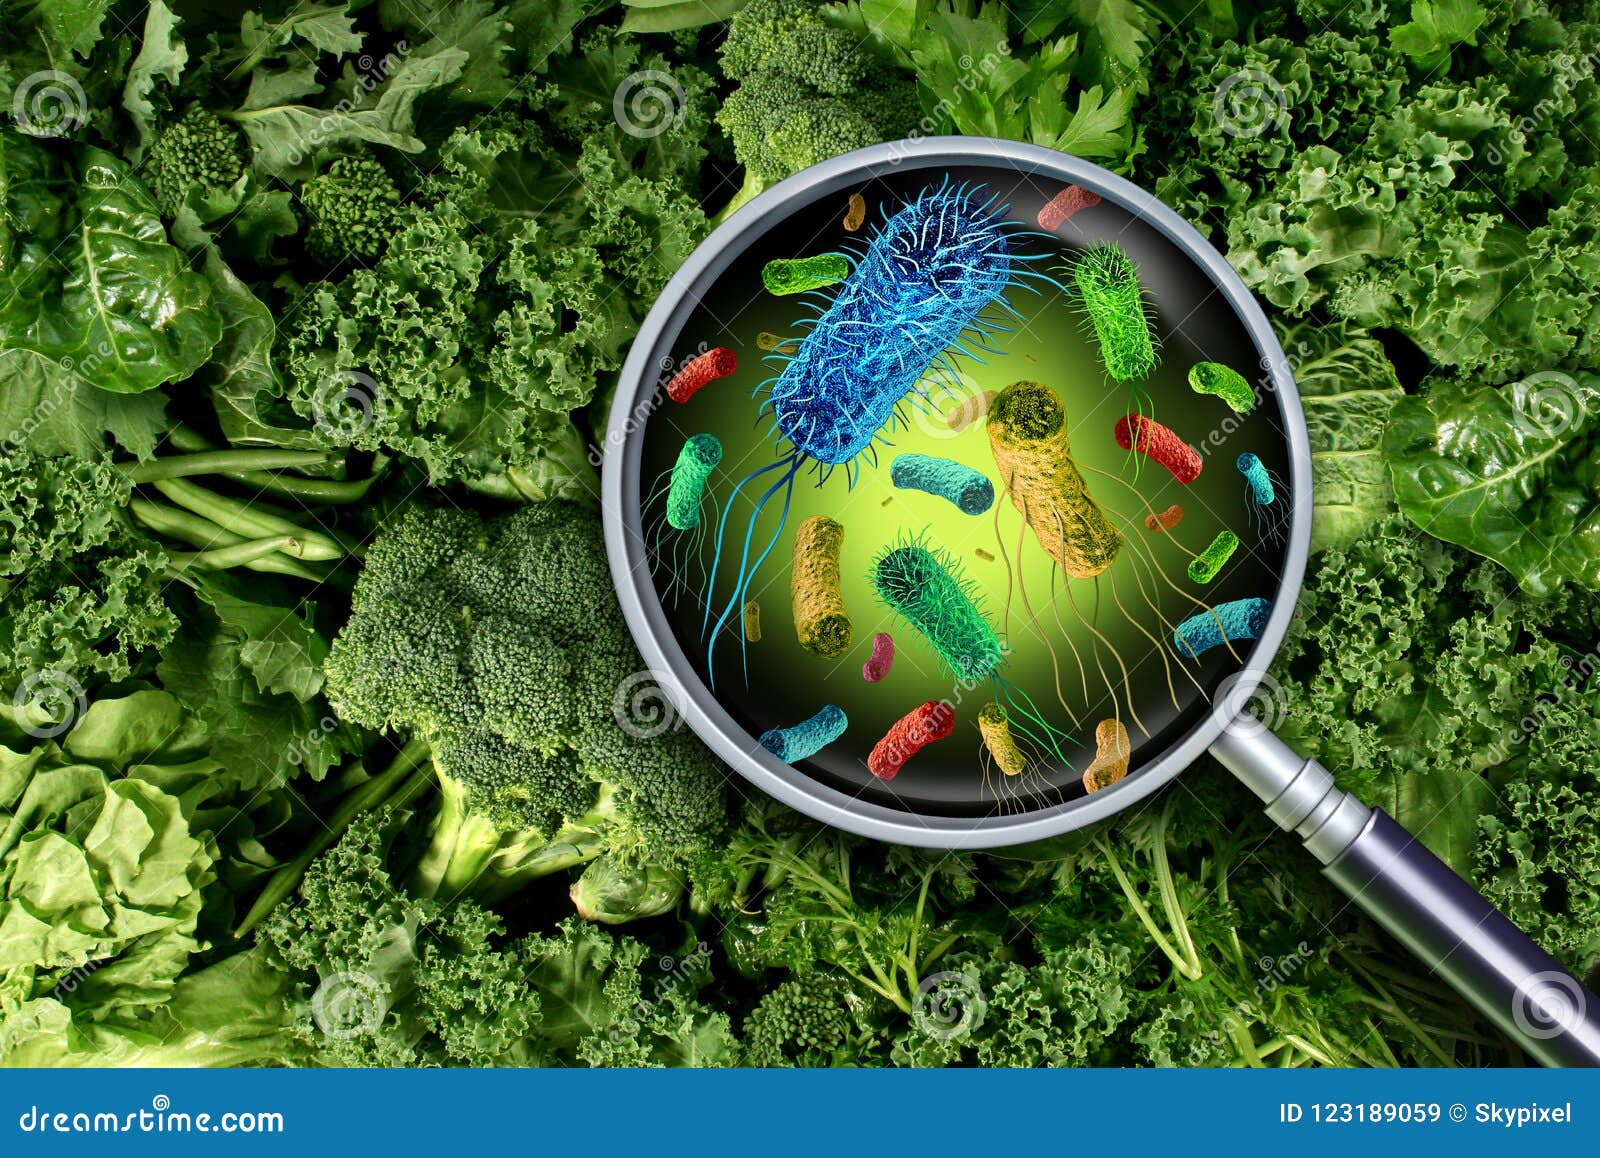 bacteria and germs on vegetables